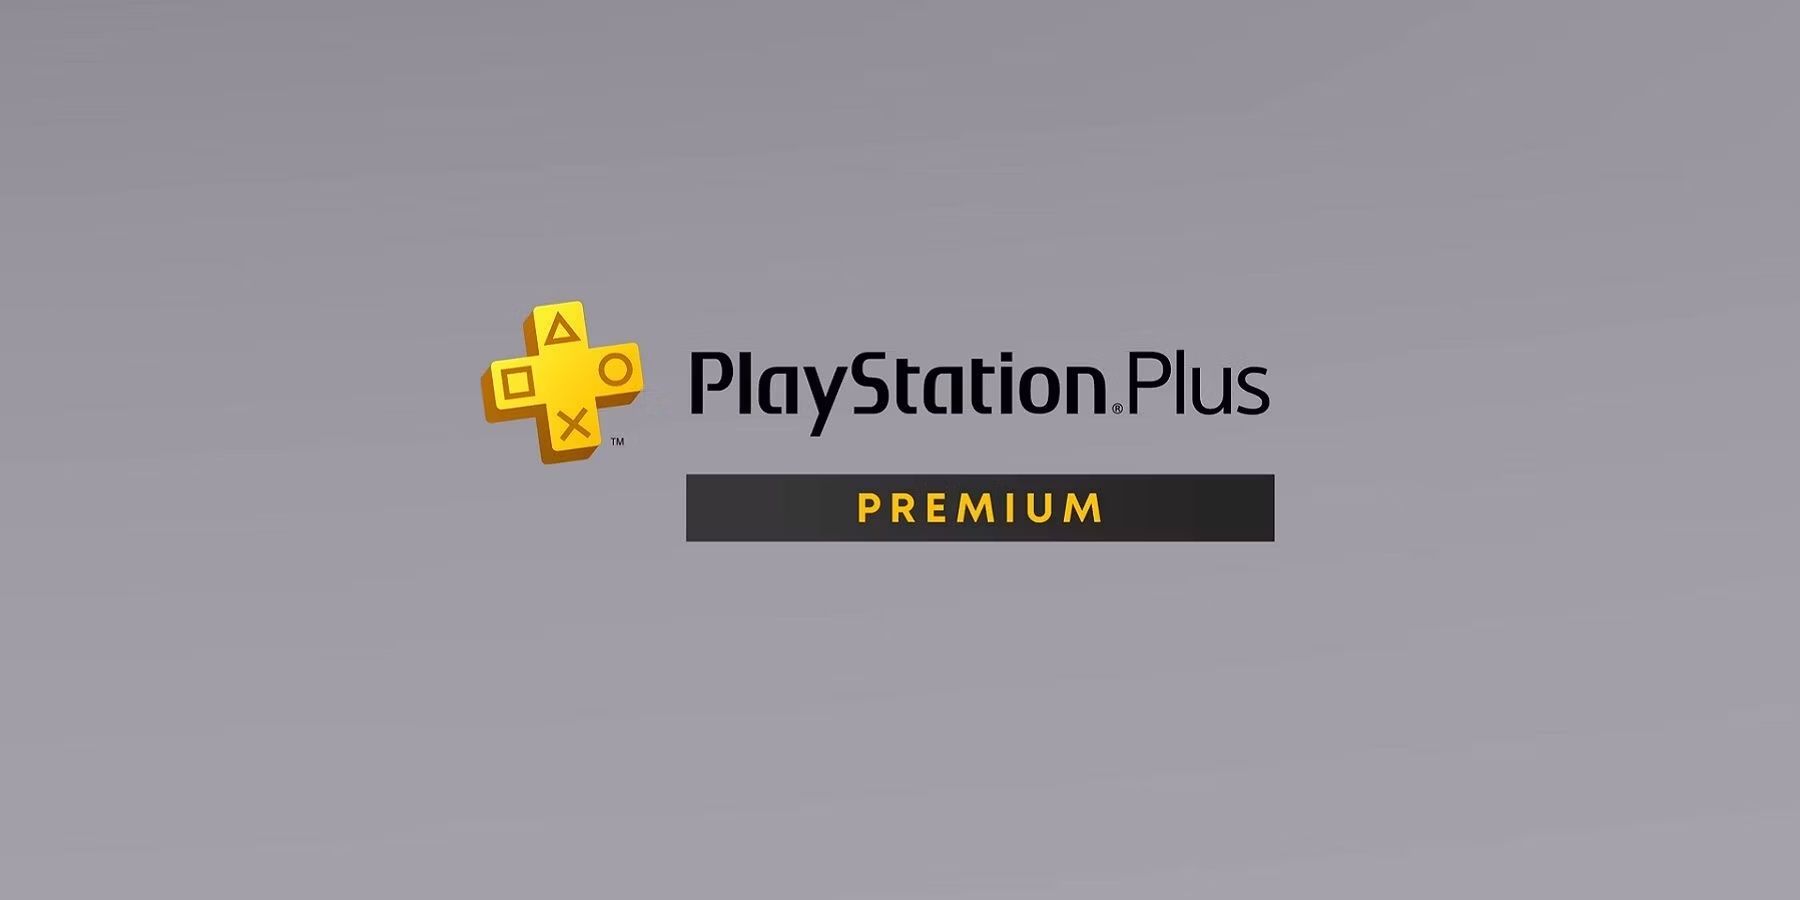 PS Plus Weekend Offer discount on select games - Sifu Premium